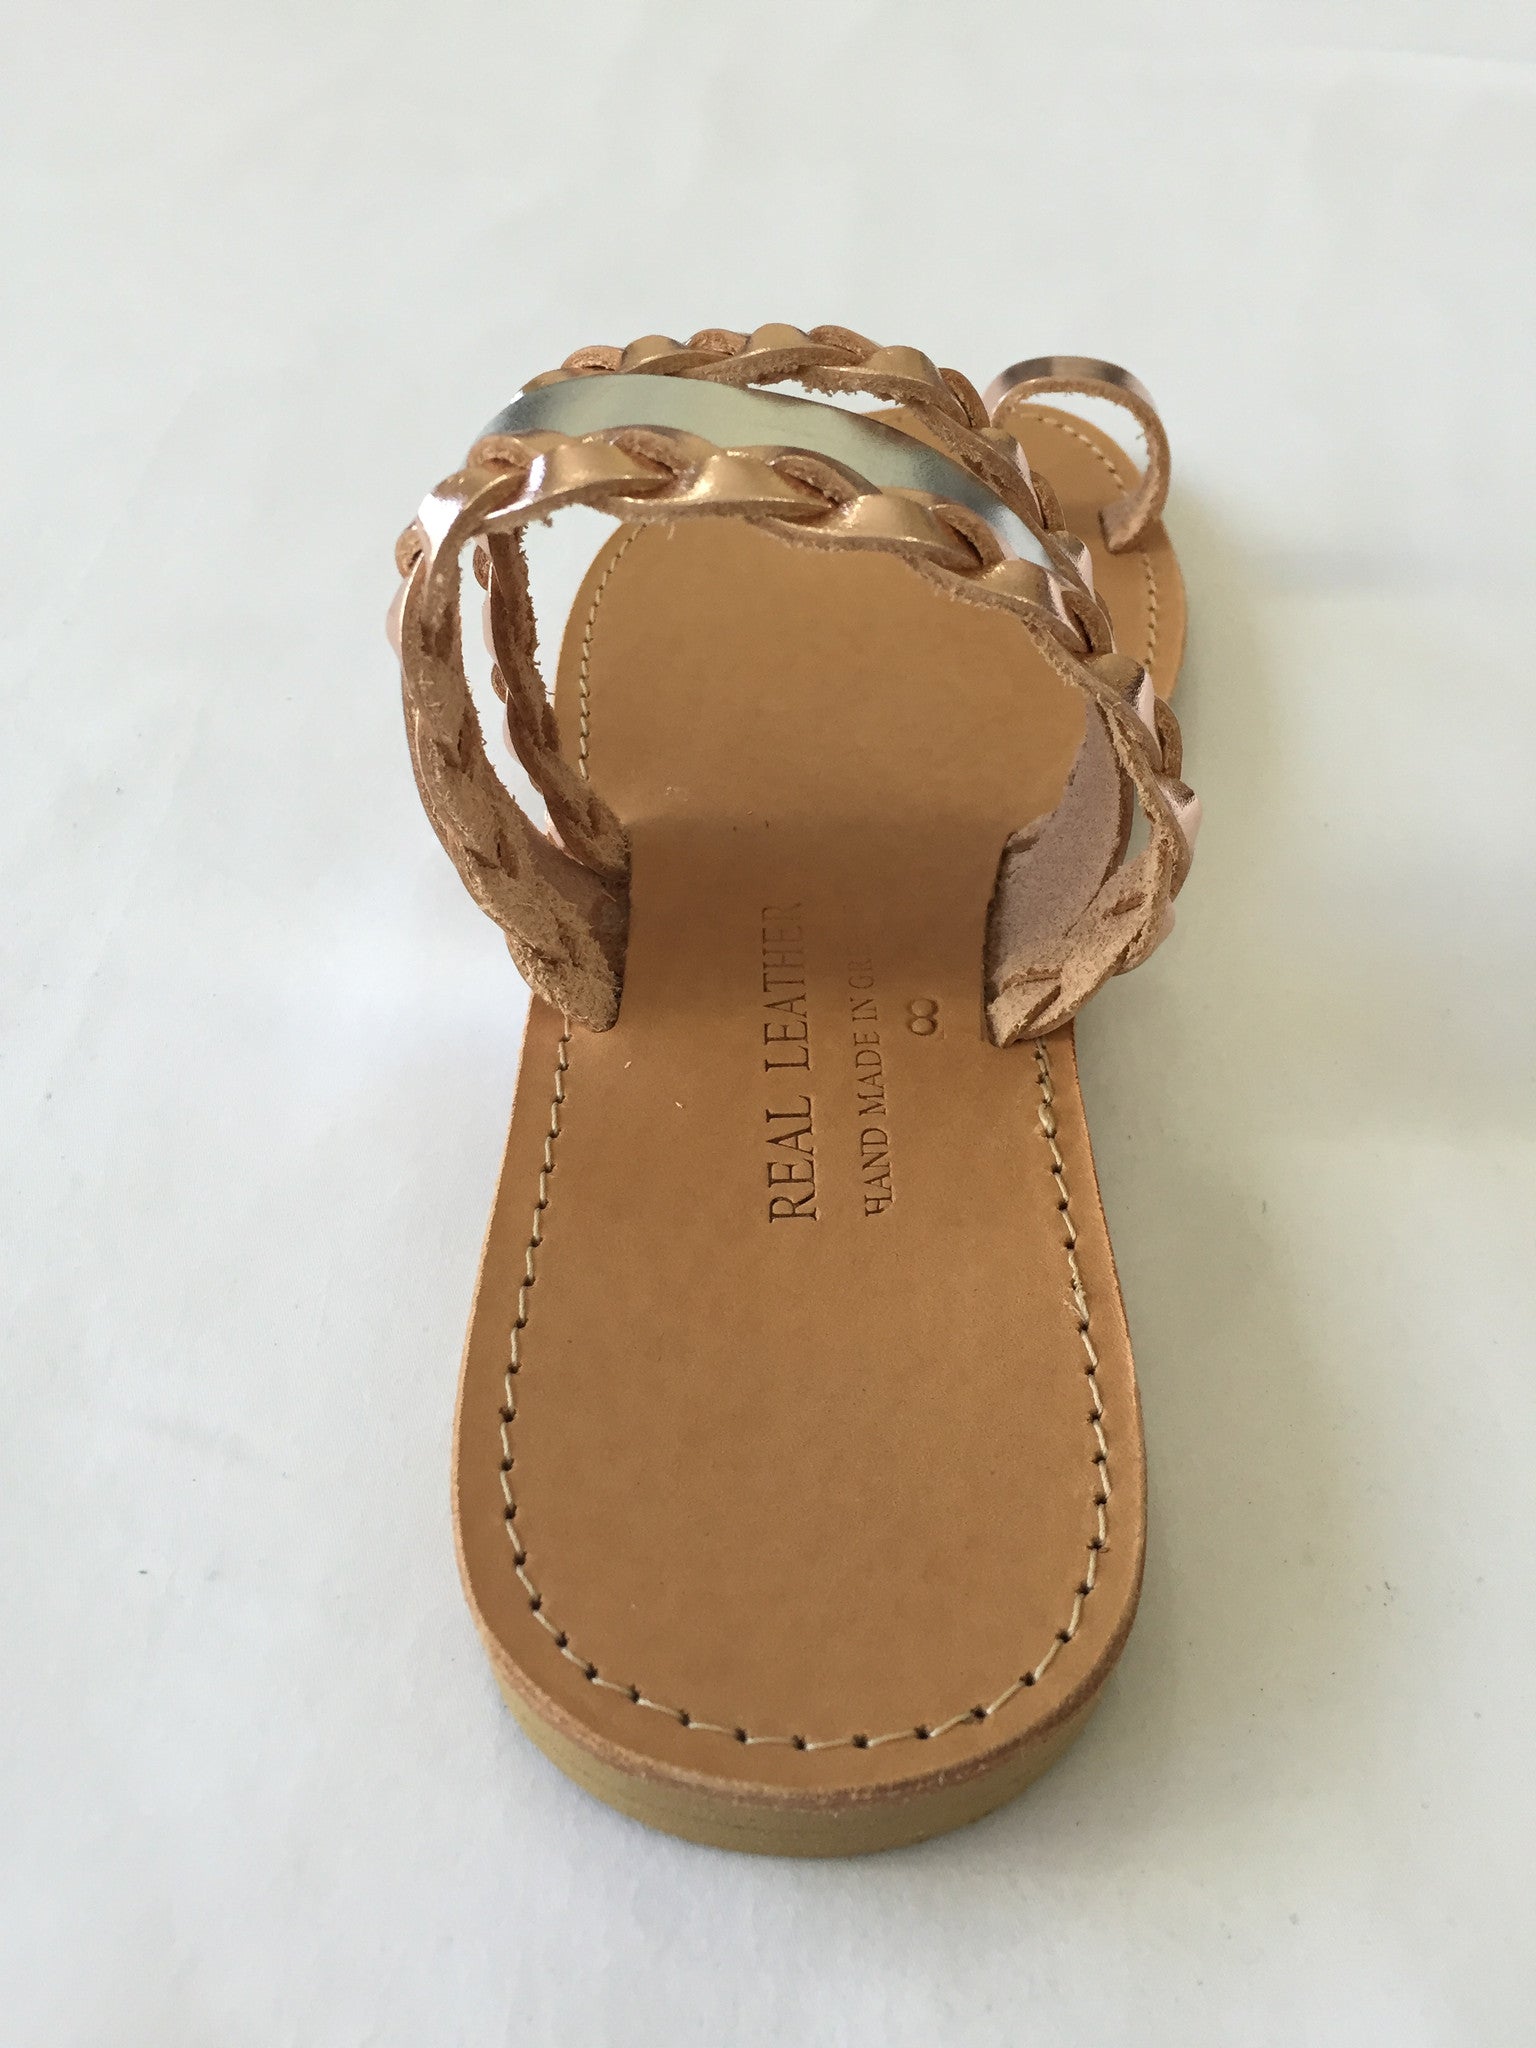 Selene Slip-on Sandals with Silver and Rose Gold Leather Straps - Kardia